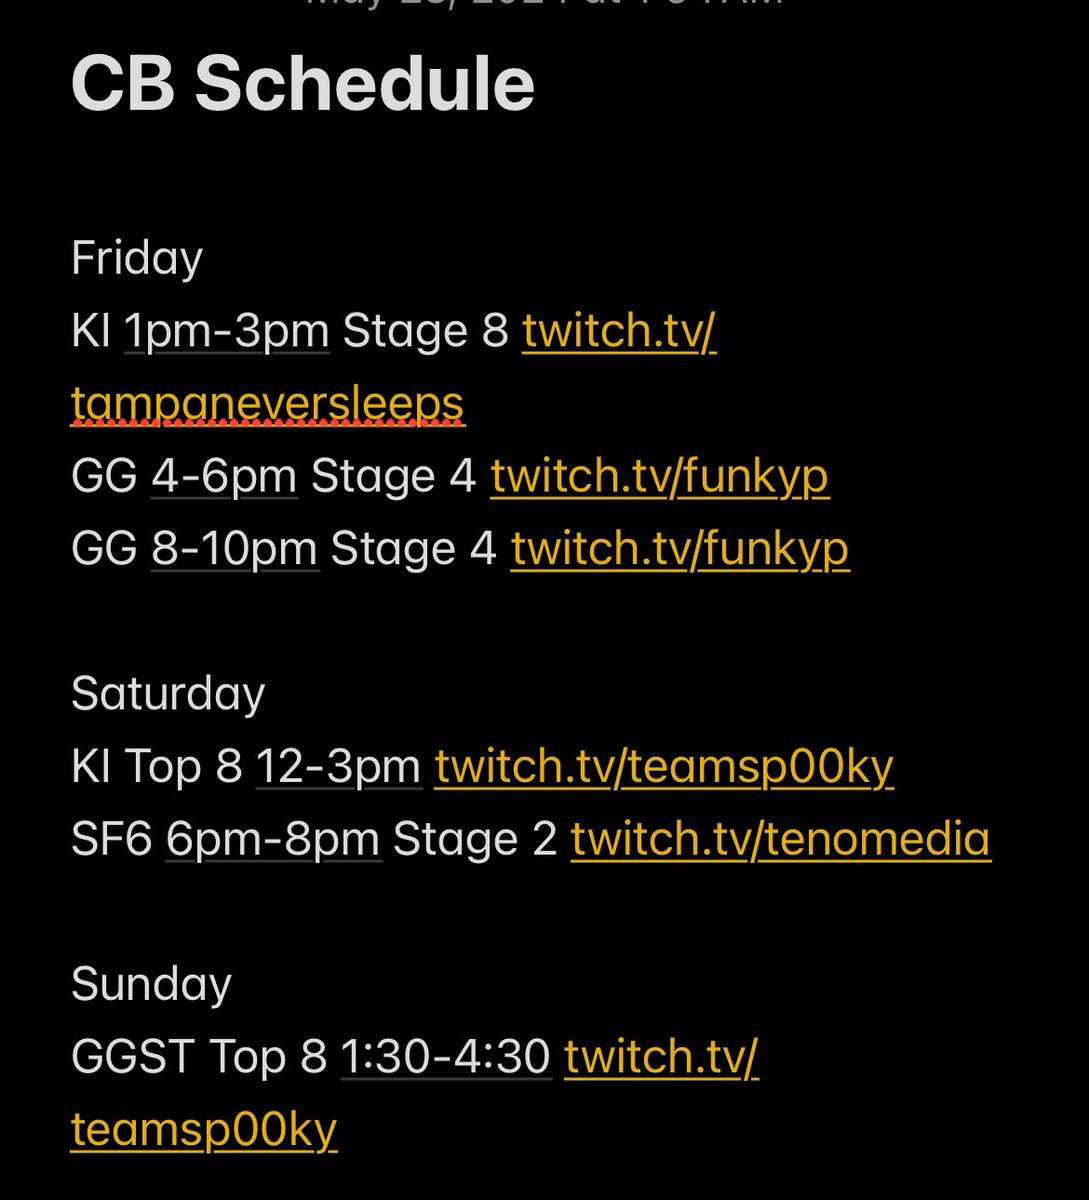 Also wanted to post my Combo Breaker schedule for the weekend! Catch you in person or on stream all CB: